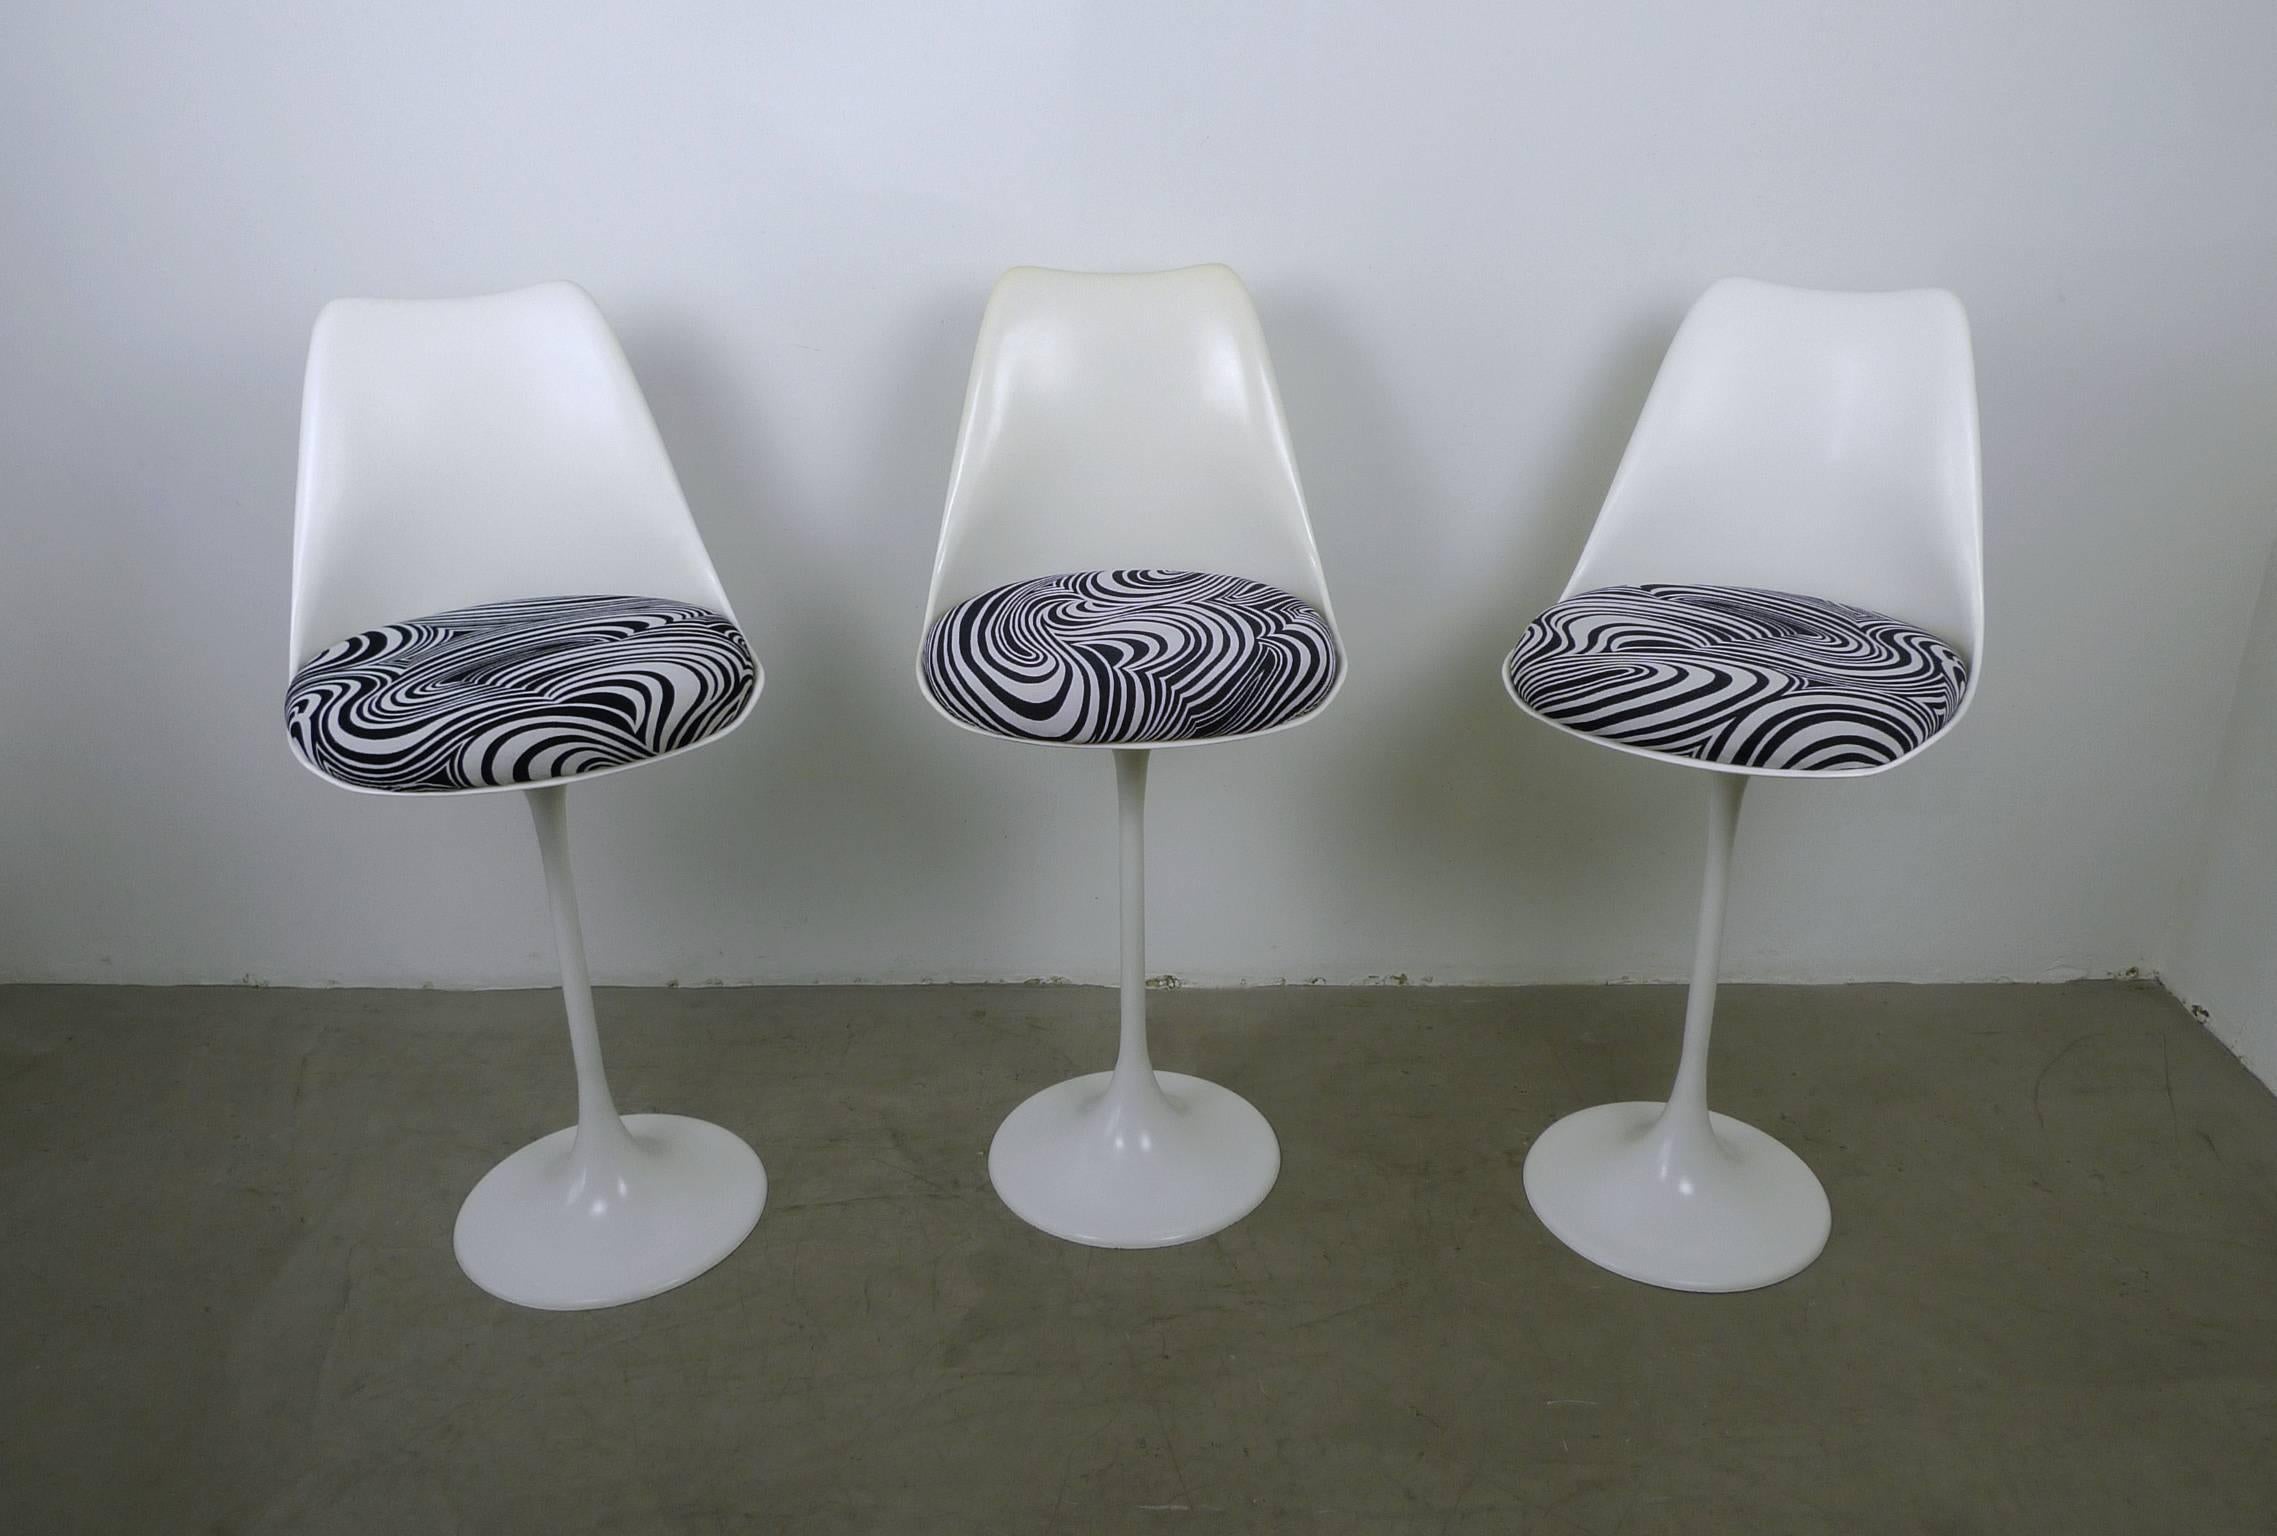 Set of three barstools from the German manufacturer Tamburin from the 1970s.
The white lacquered tulip base is made of metal and the rotatable seat is made of plastic. The seat cover shows a psychedelic black and white pattern.
The set is in good